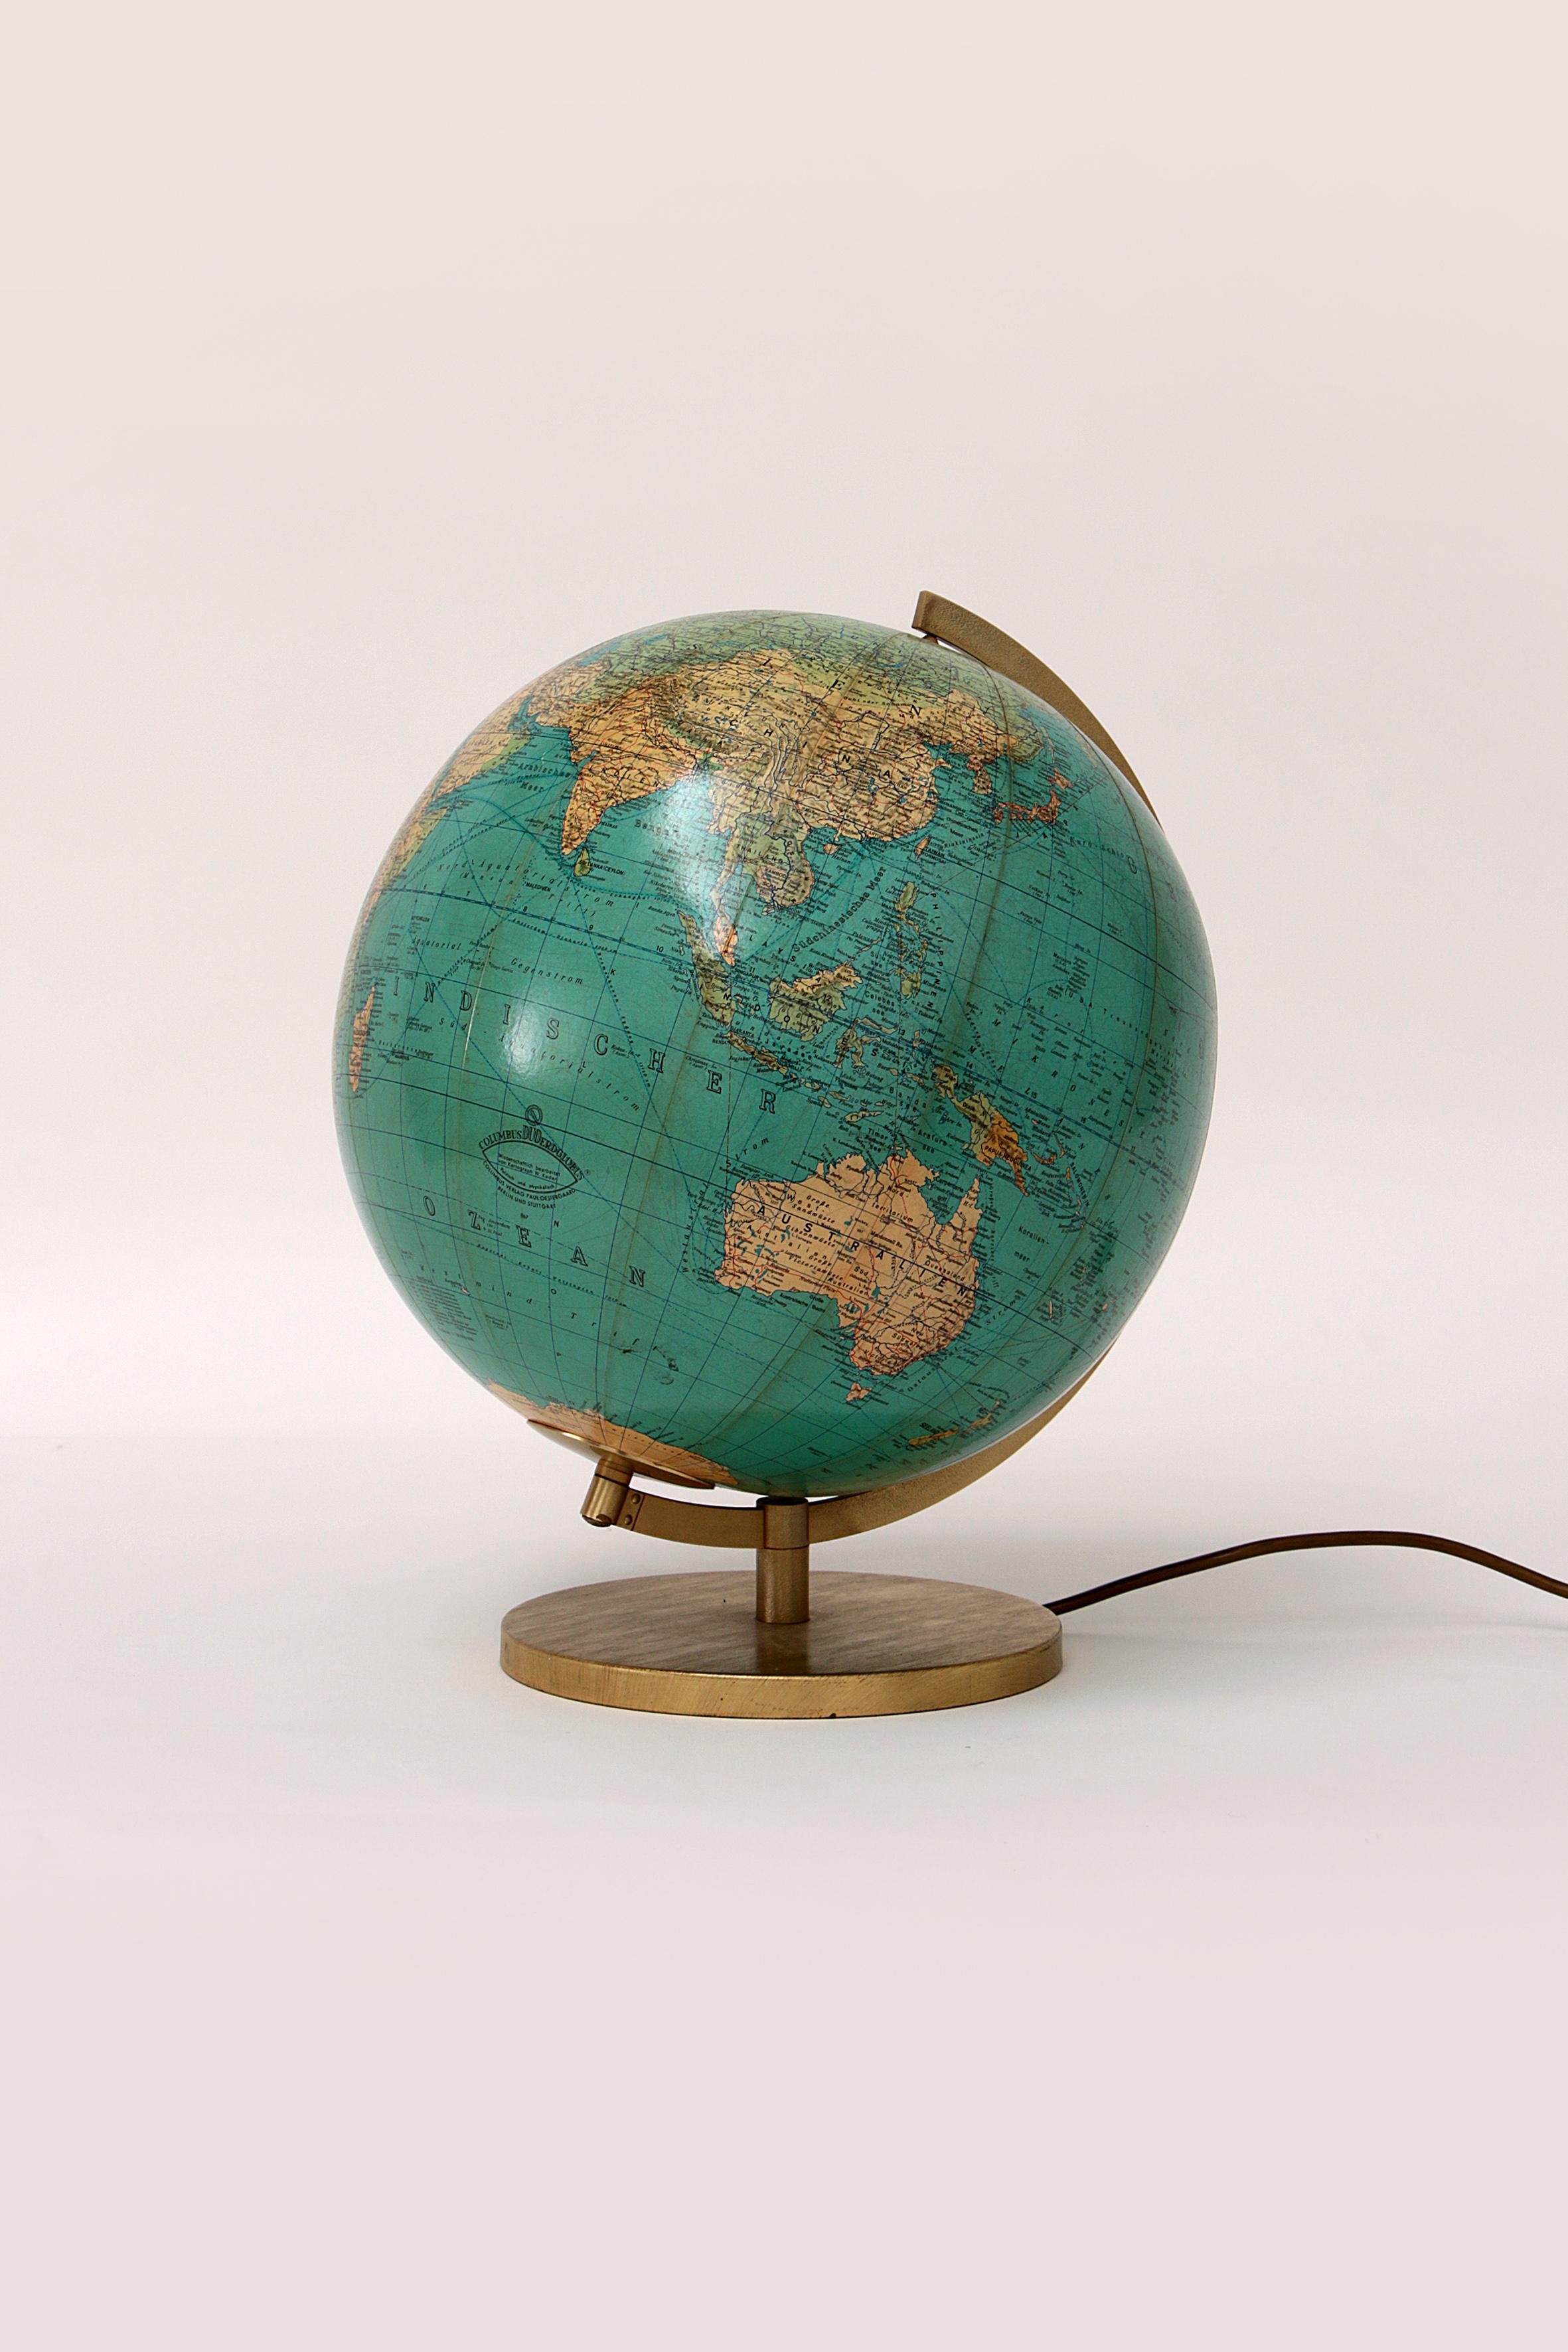 This beautiful vintage globe has a brass-colored base.

This globe comes from the 1970s and is made in Germany.

Made by JRO Verlag Munchen.

The globe is equipped with lighting. In a fine condition.

Sustainable: environmentally conscious